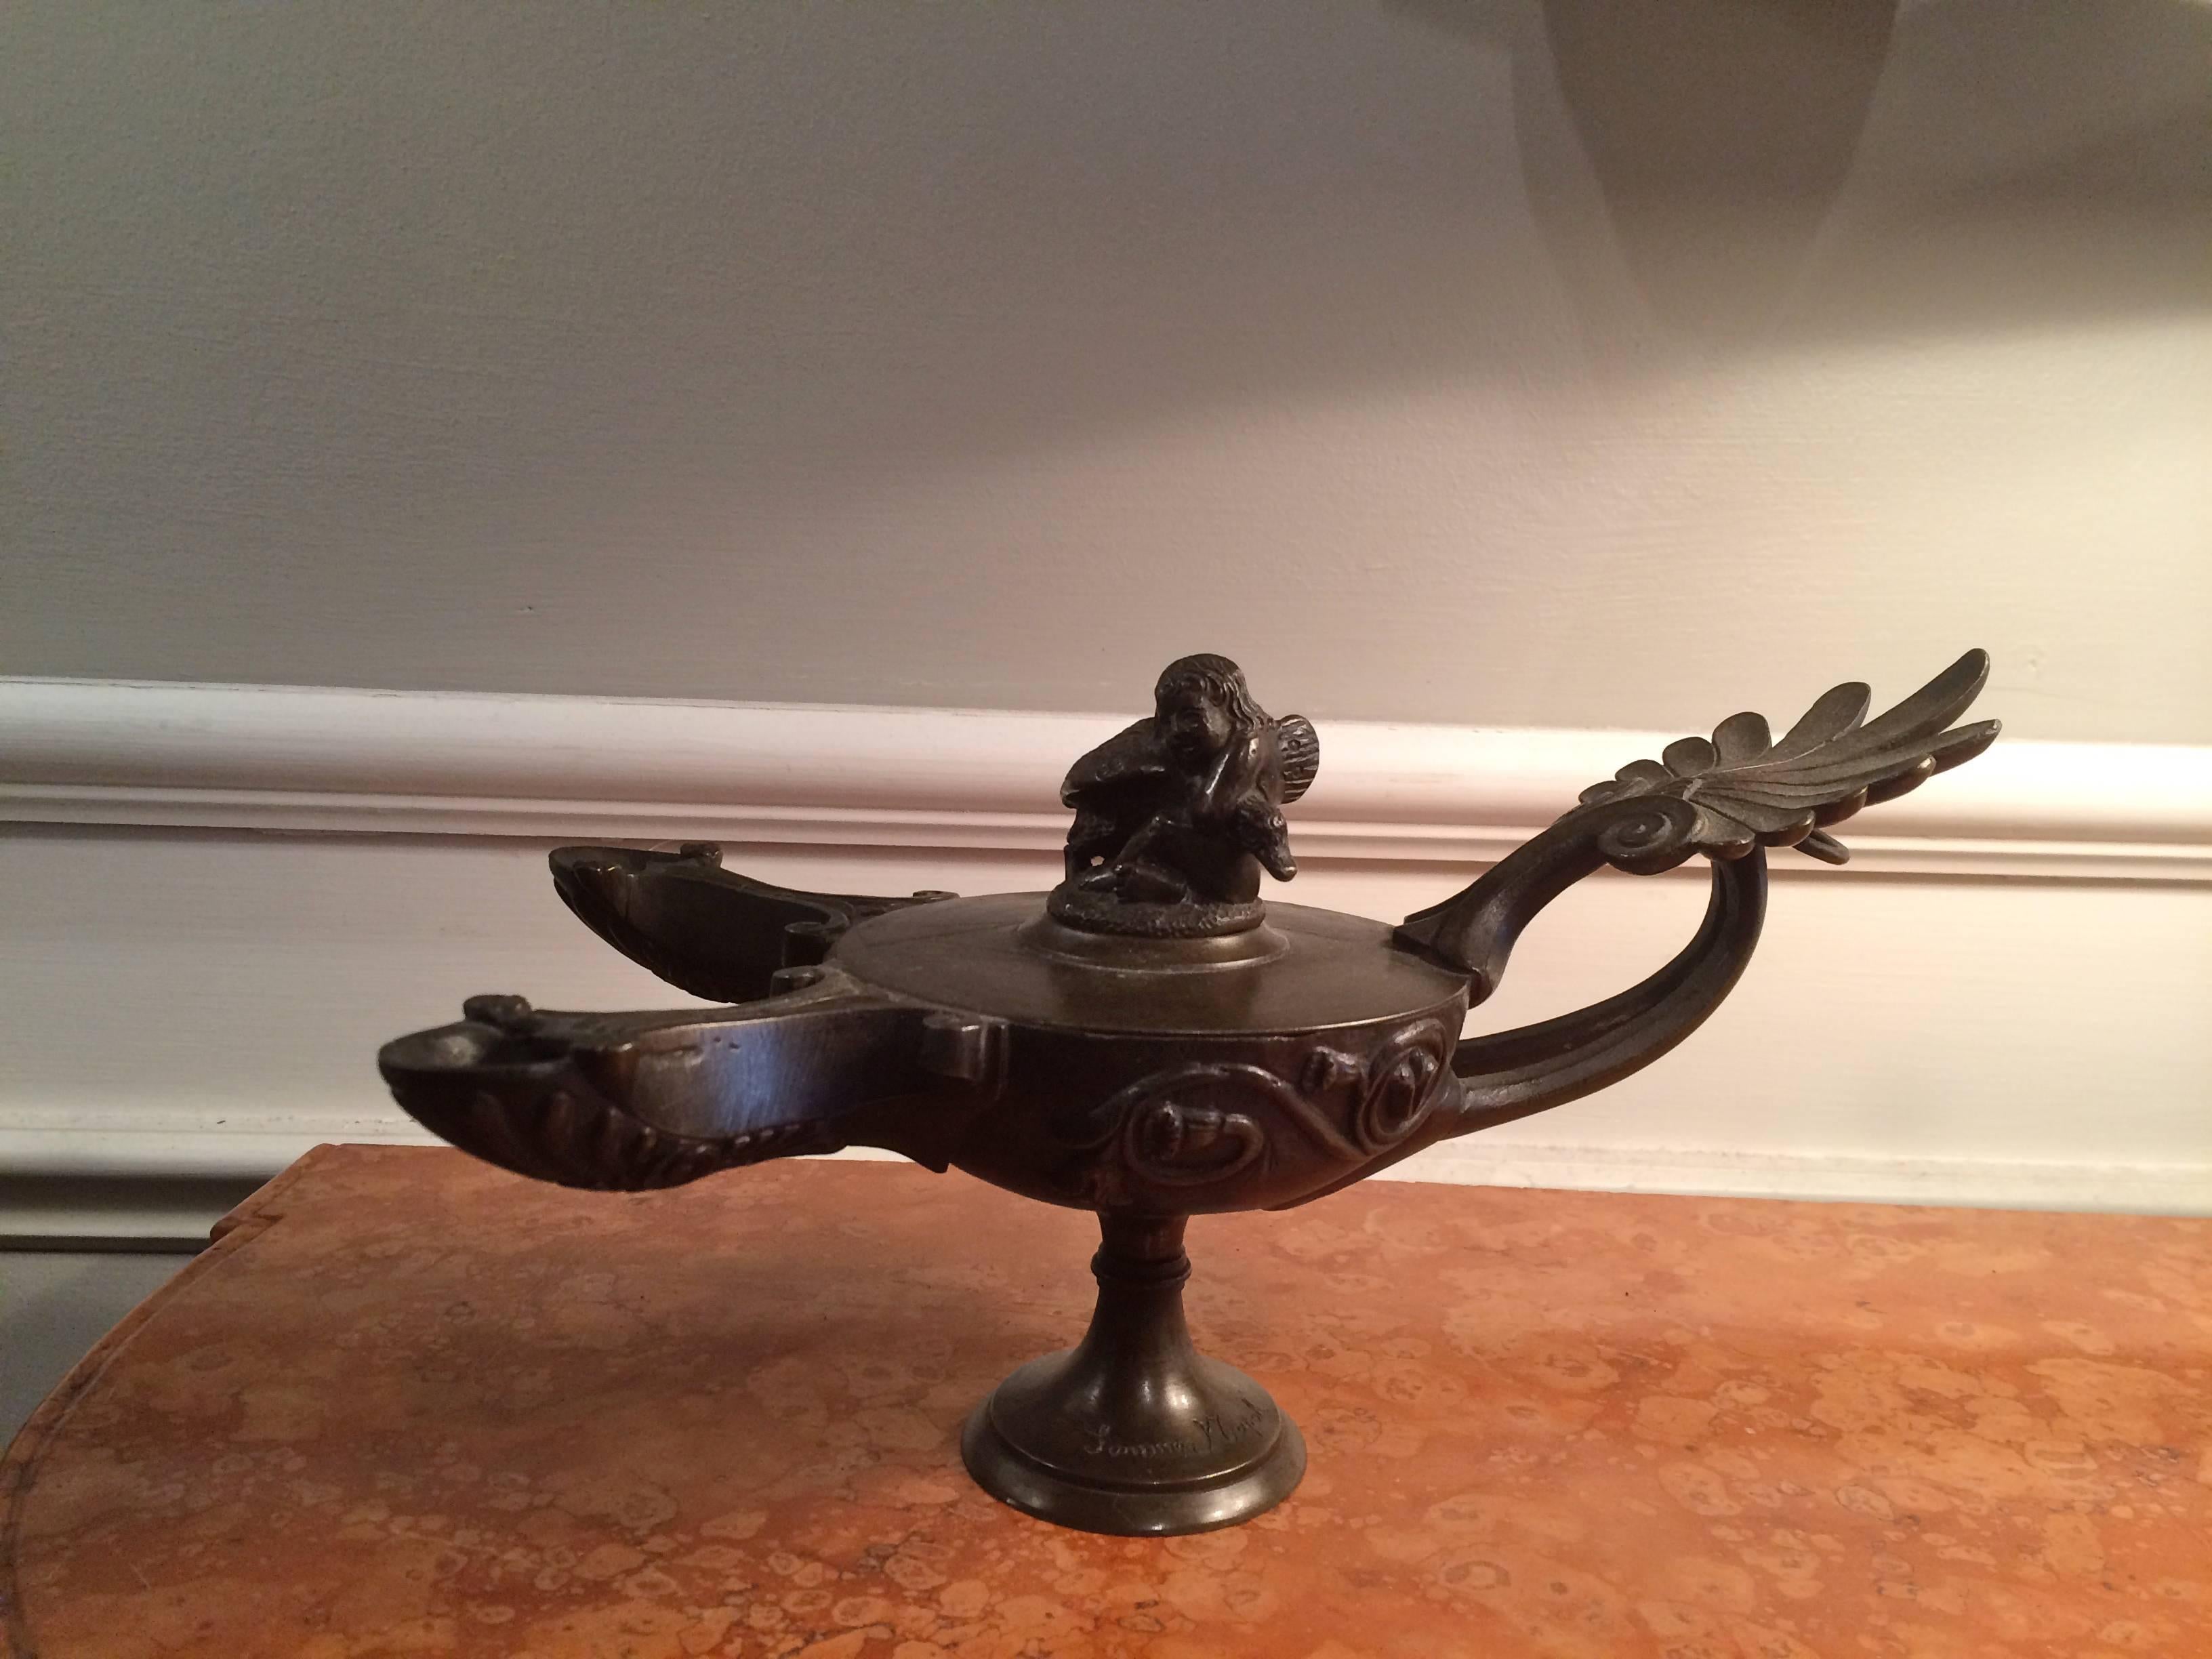 Italian 'Grand Tour' bronze oil lamp, after the ancient Roman original, with two spouts and removable top depicting Cupid wrestling the swan. Acanthus leaf handle, signed Sommer, Napoli. 
The Fonderia Sommer was one of the two top foundries casting